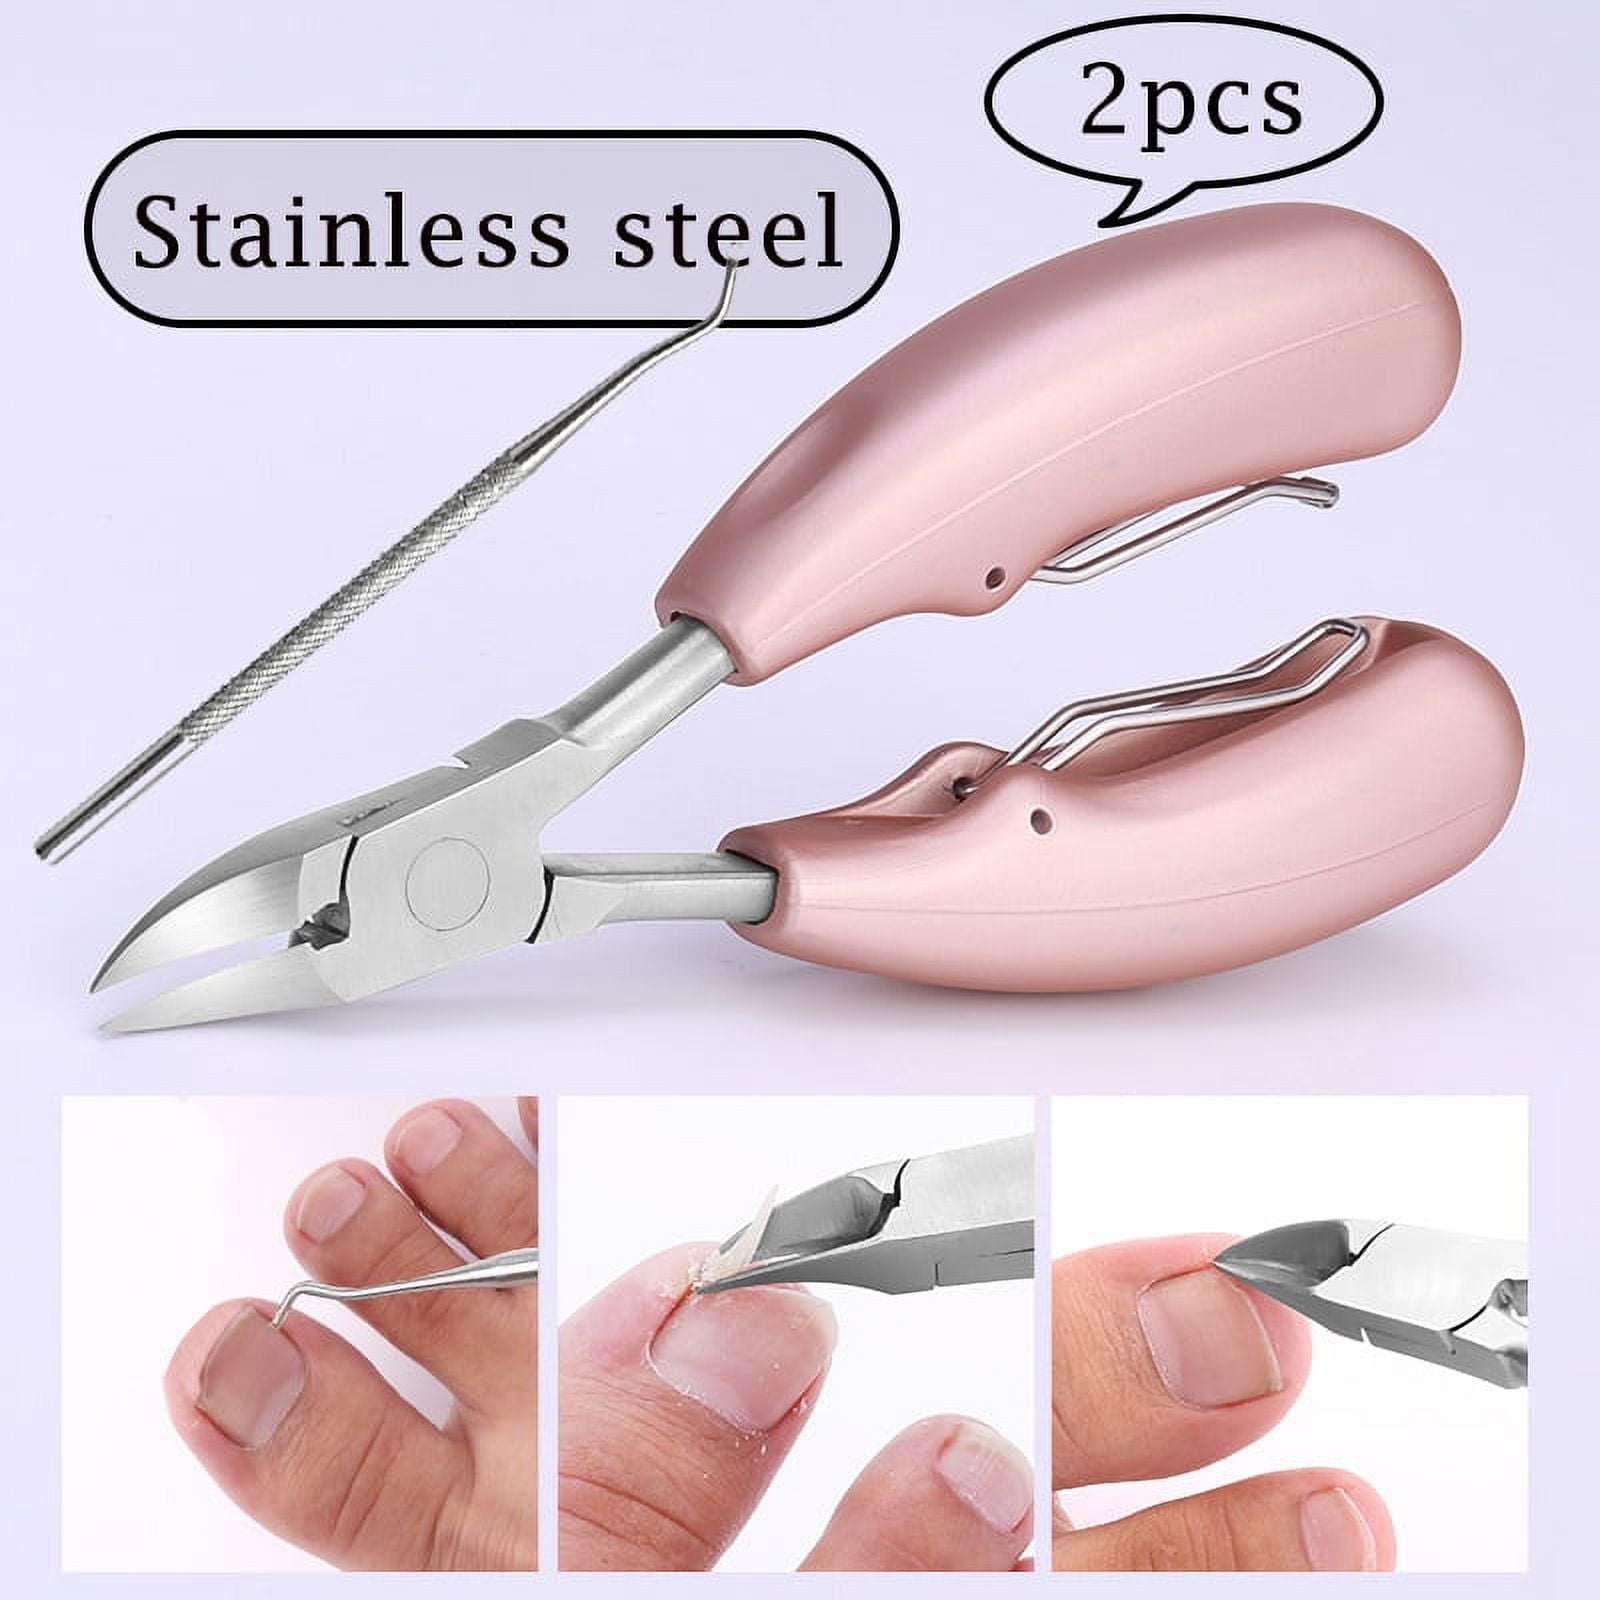 Thick Toenail Clippers, Large Nail Clippers for Podiatrist/Ingrown/Thick/Professional/Men/Seniors Toenail and Nail Surgical Grade Stainless Steel